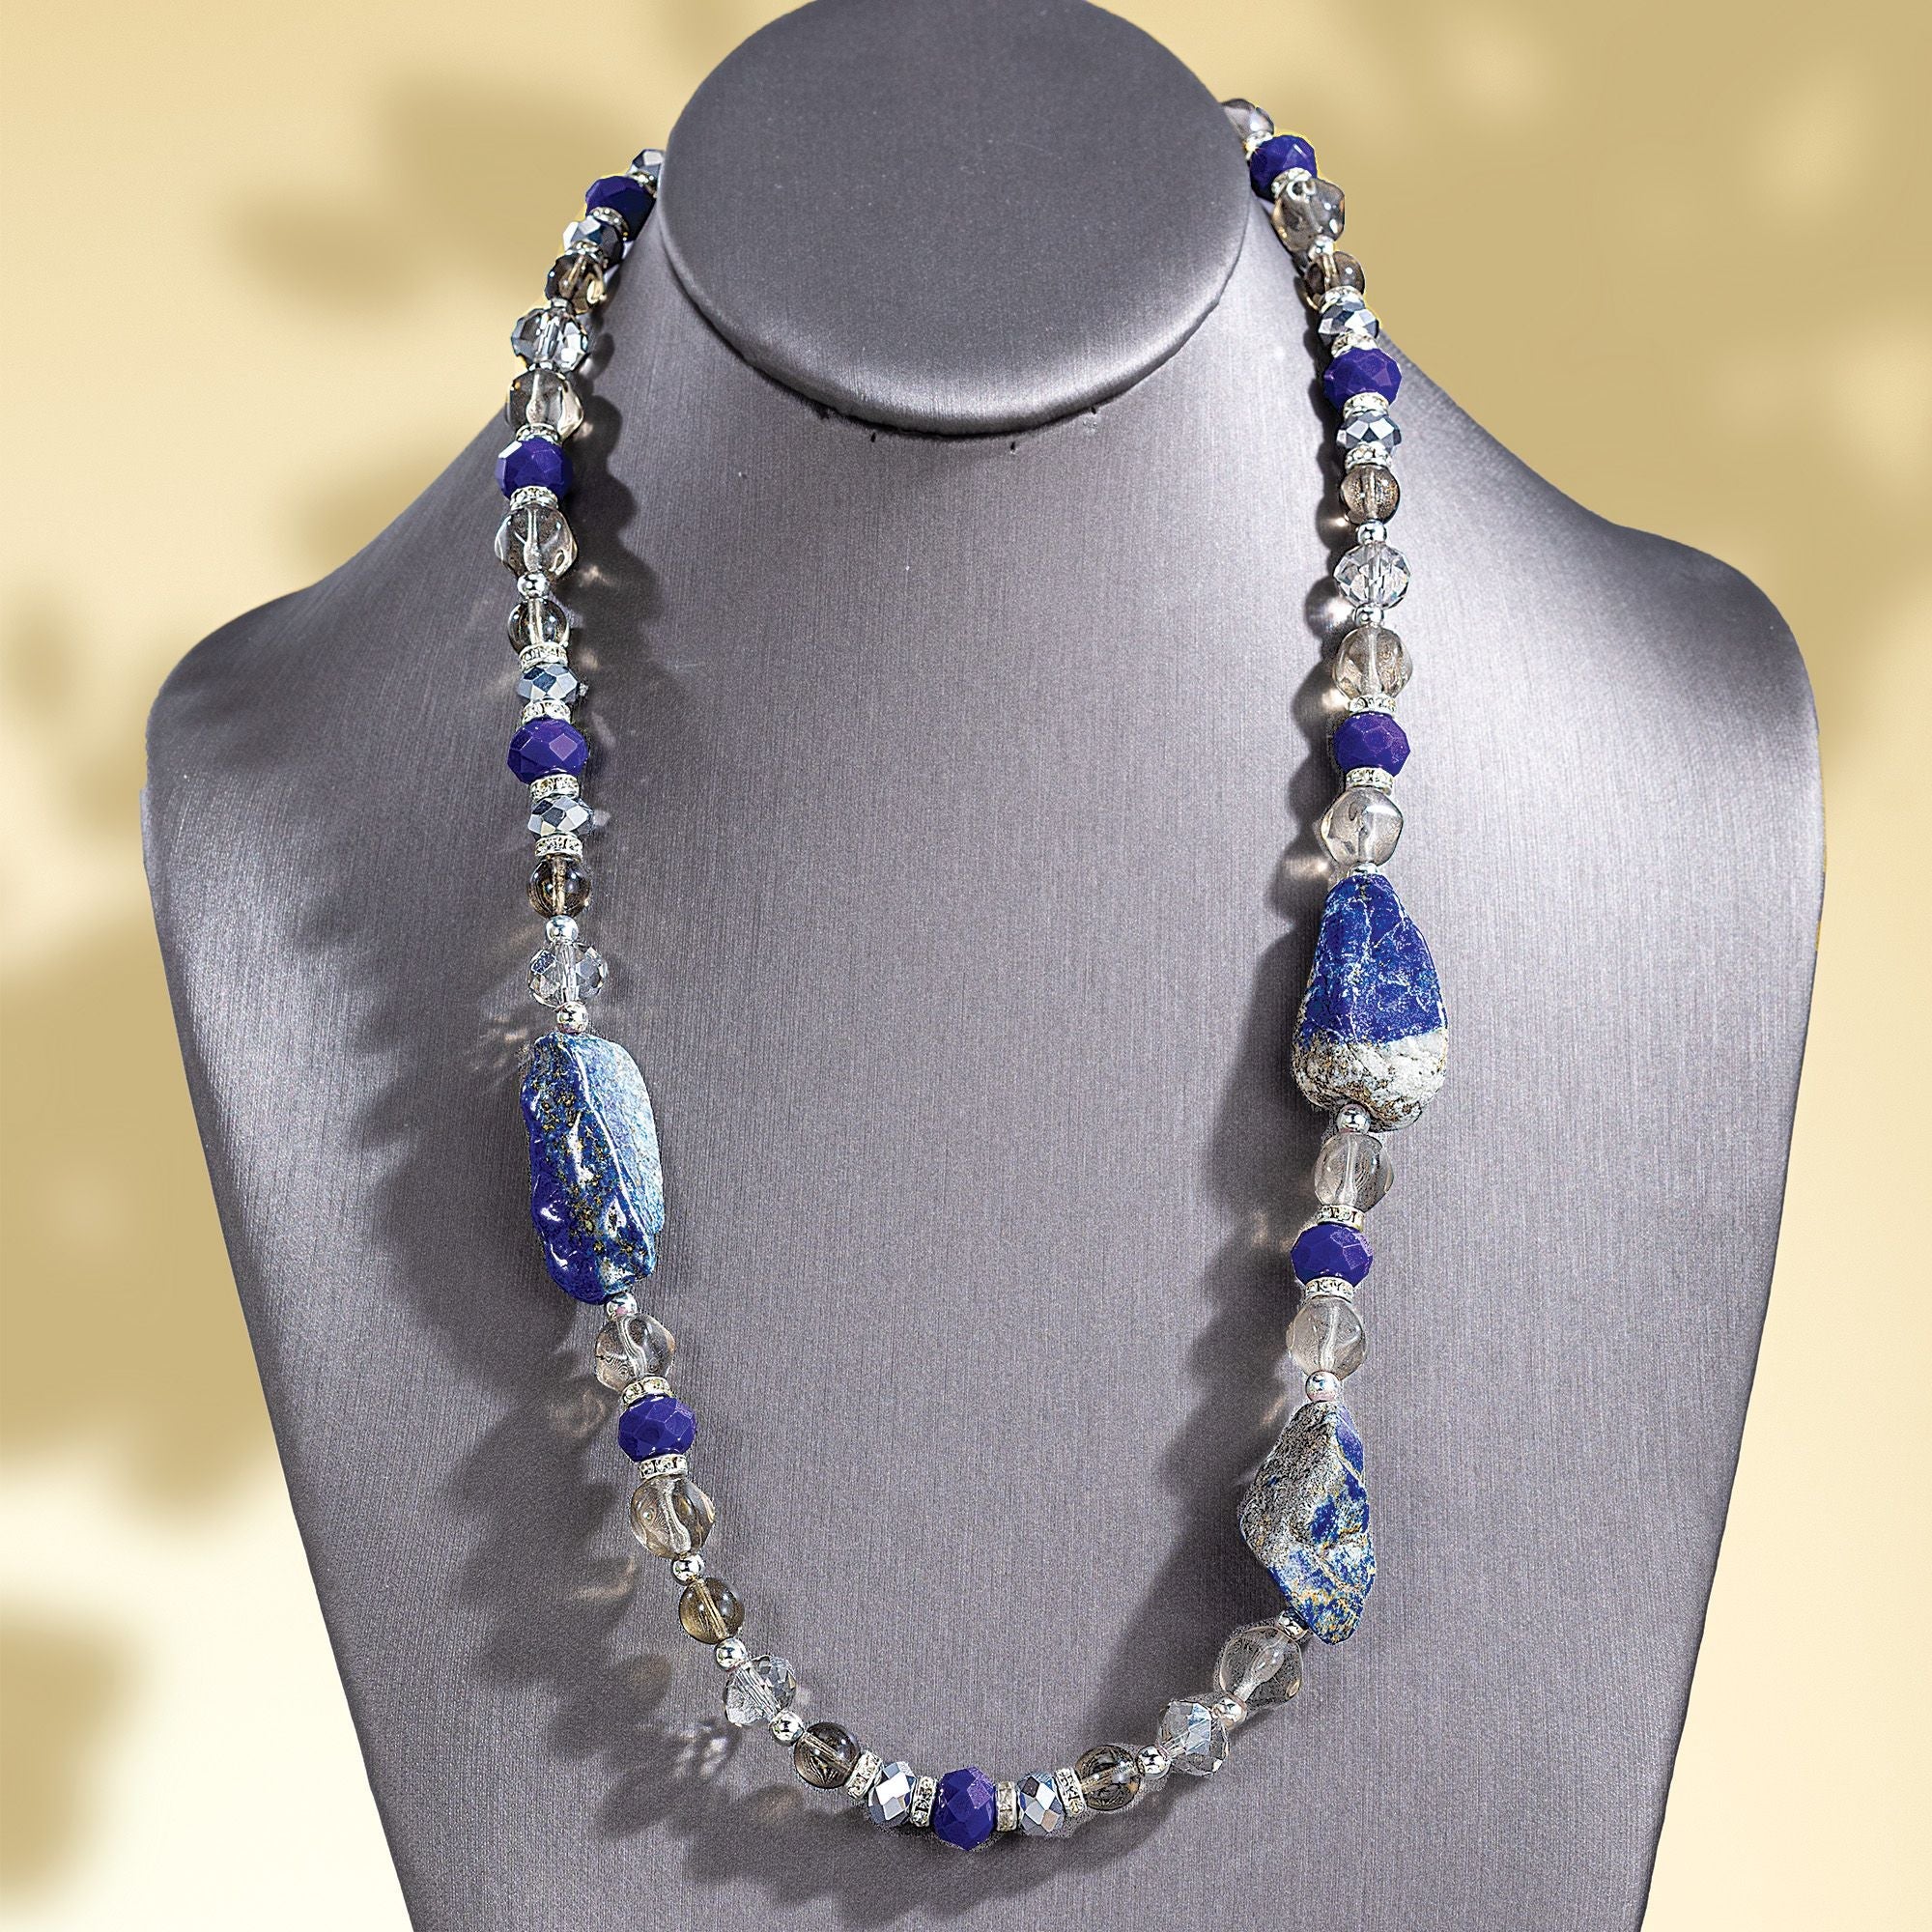 Vibrant Magnetism Murano Glass And Lapis Necklace